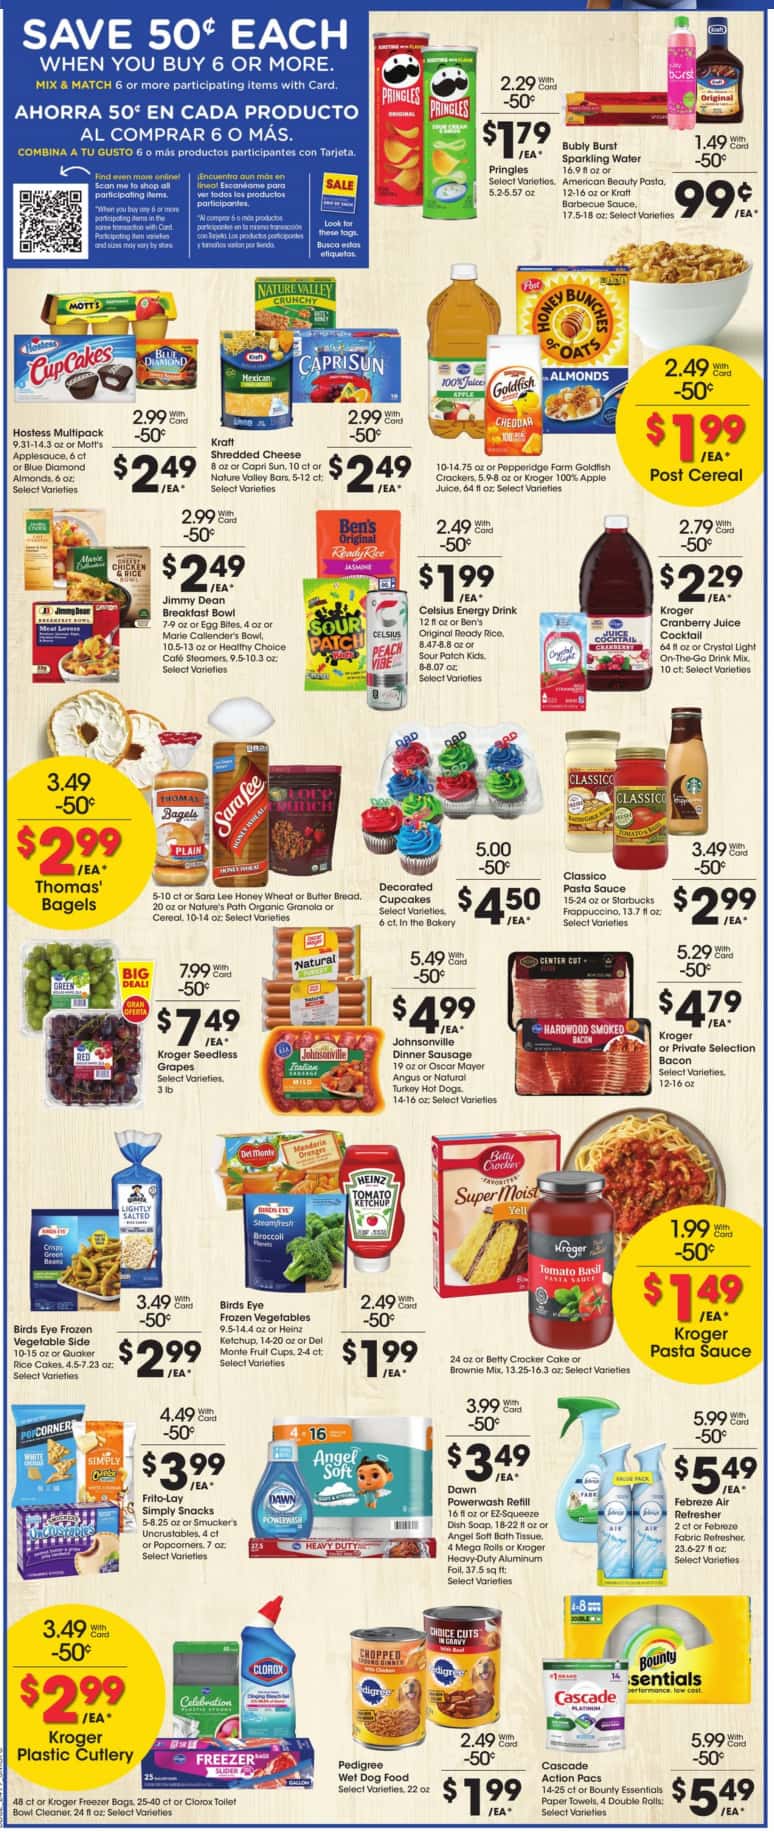 Smith's Weekly Ad July 2024 Weekly Sales, Deals, Discounts and Digital Coupons.